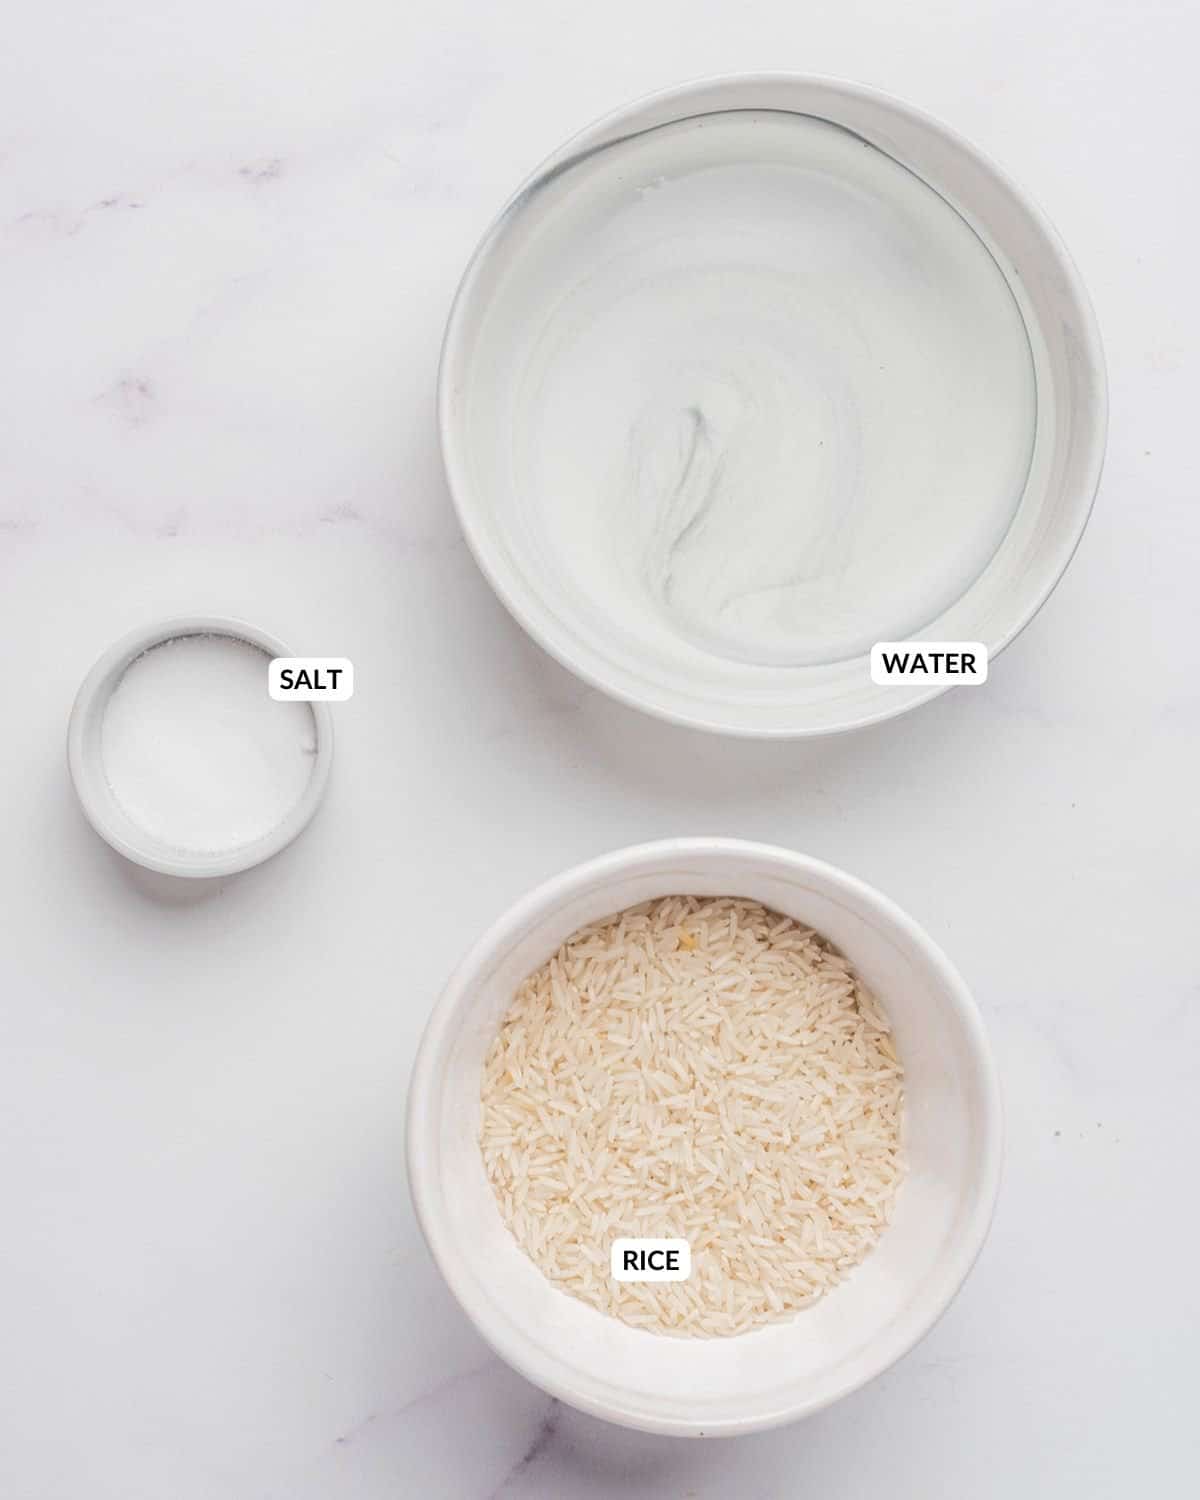 An overhead image of uncooked rice in one bowl, water in another bowl, and salt in a small bowl.